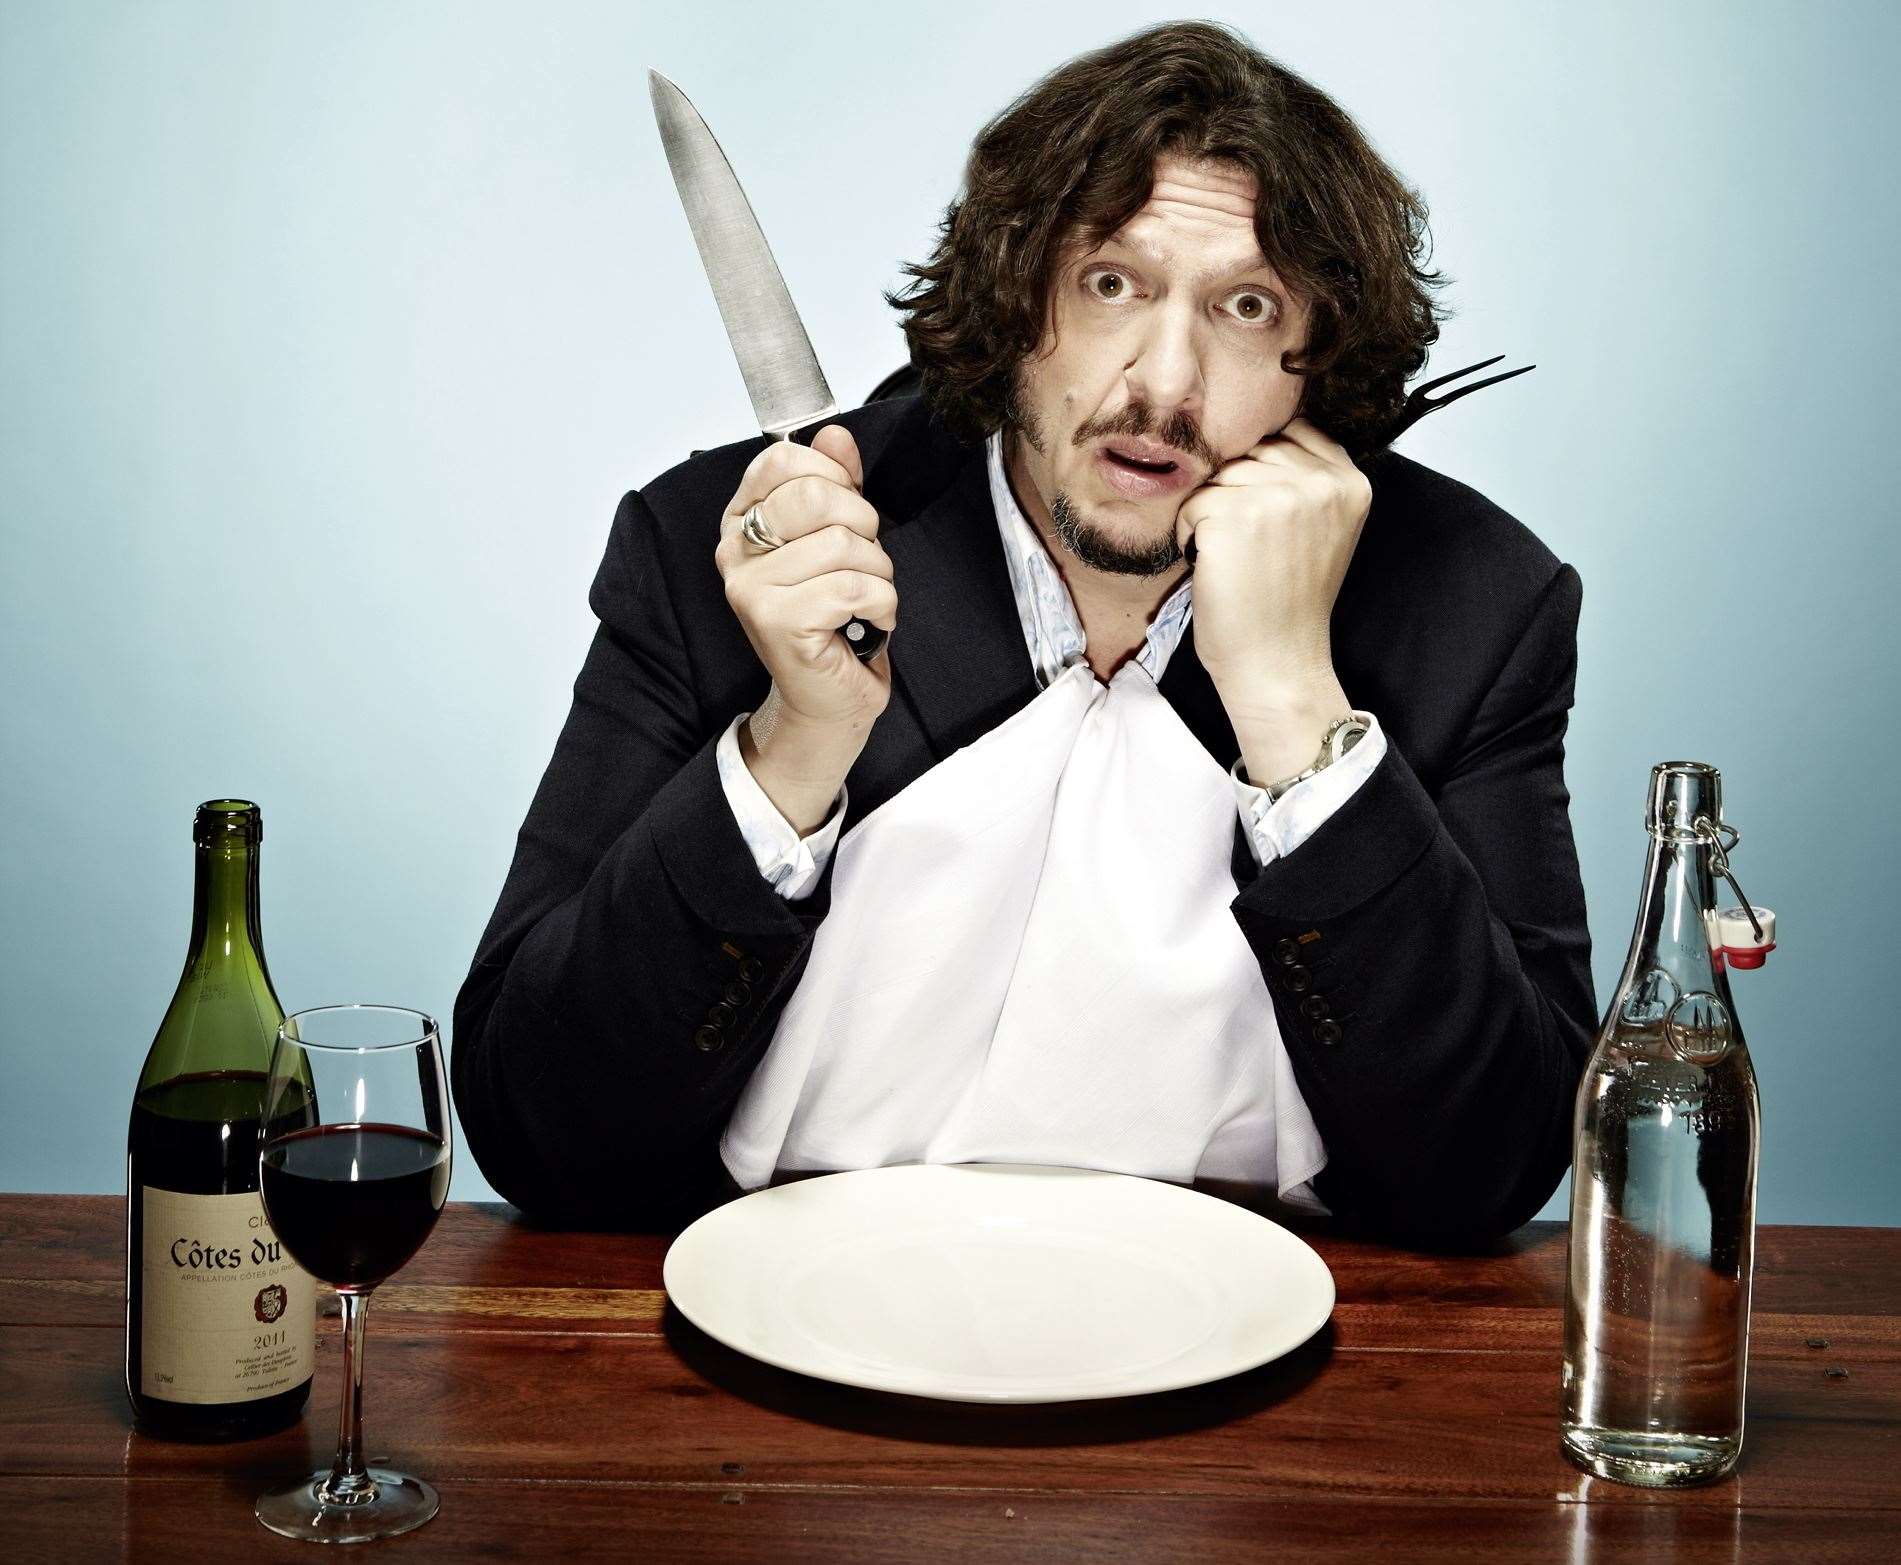 Famous restaurant critic Jay Rayner, who I am not Picture: Freddie Middleton